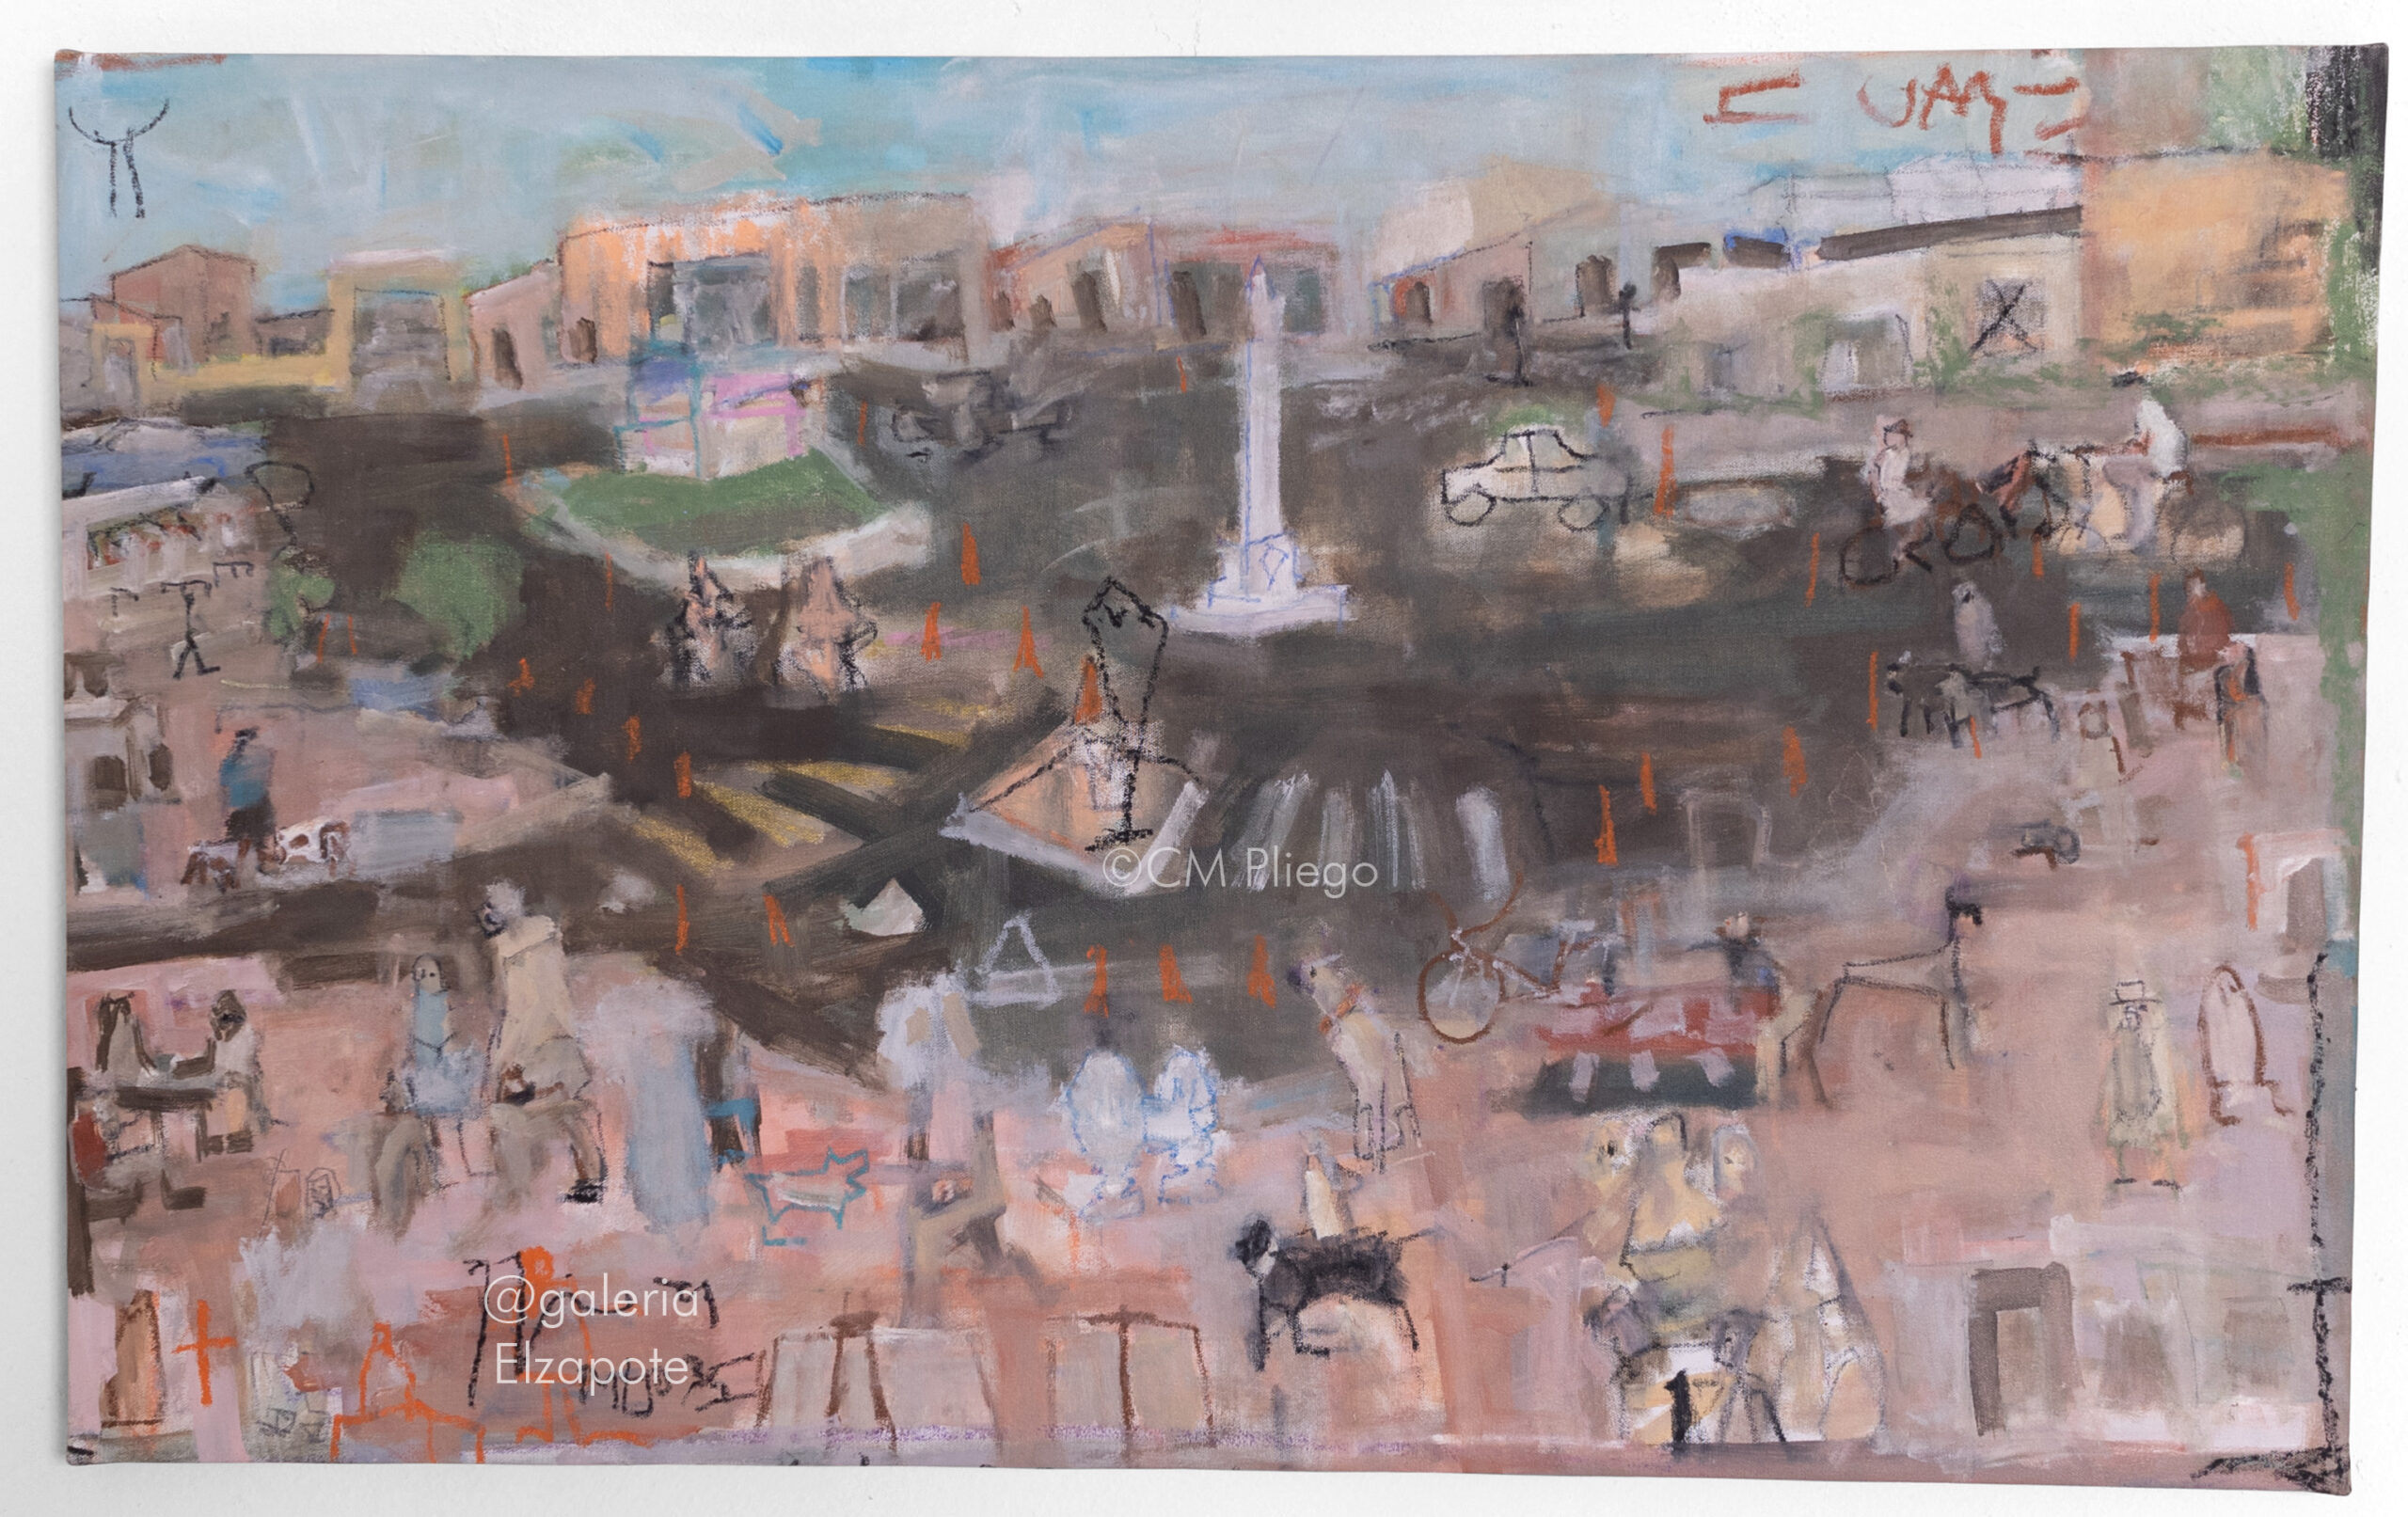 Painting on canvas depicting a panoramic view of Paseo de Montejo in Merida through loosen brushstrokes, describing the everyday life of people with a touch of fantasy